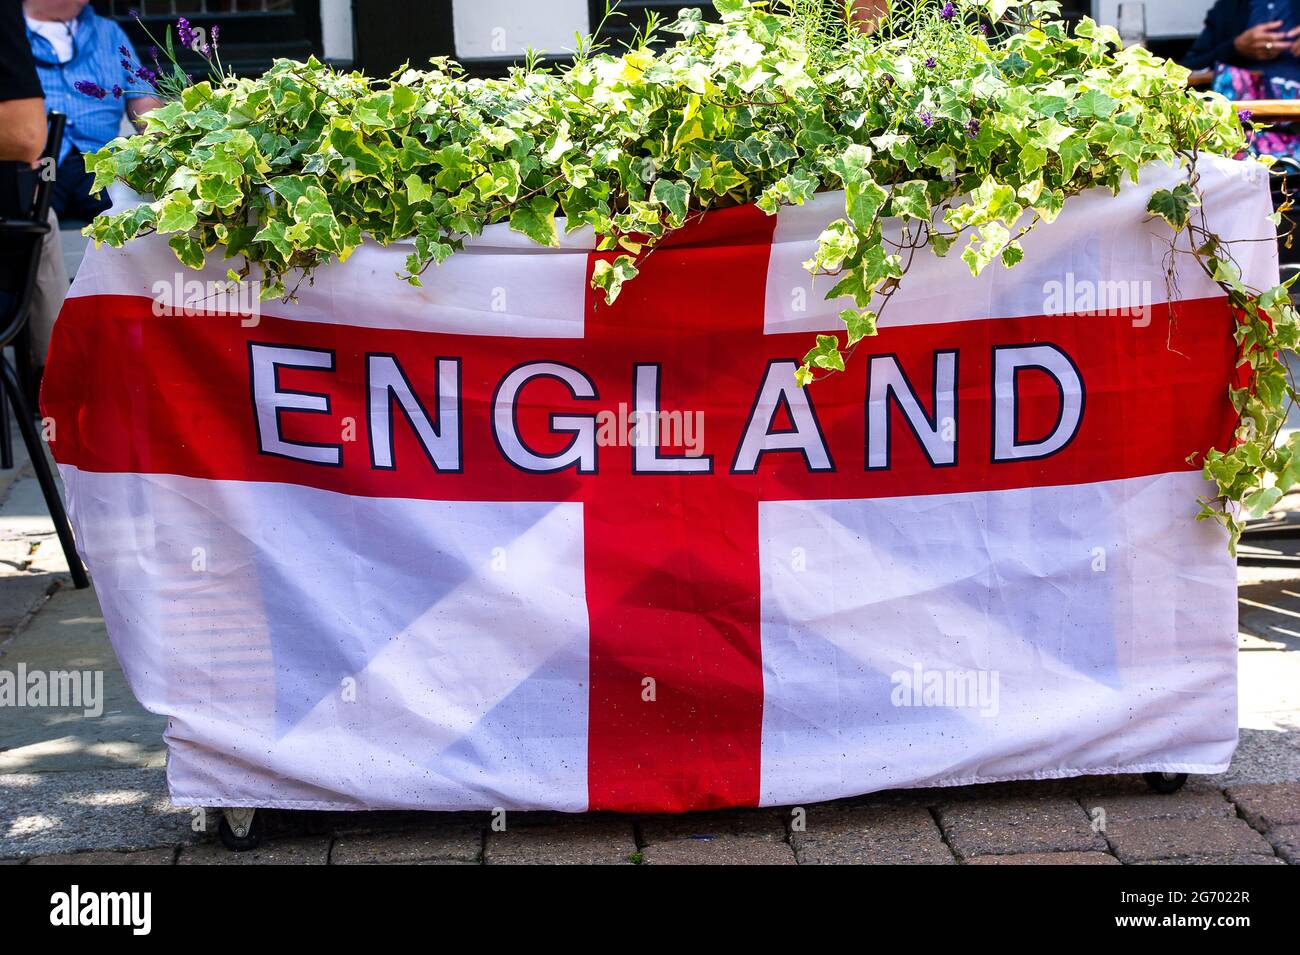 Uxbridge, London Borough of Hillingdon, UK. 9th July, 2021. The Three Tuns pub in Uxbridge has England flags and bunting outside as they get ready for the big UEFA Euro 2020 final this Sunday between England and Italy . Credit: Maureen McLean/Alamy Live News Stock Photo